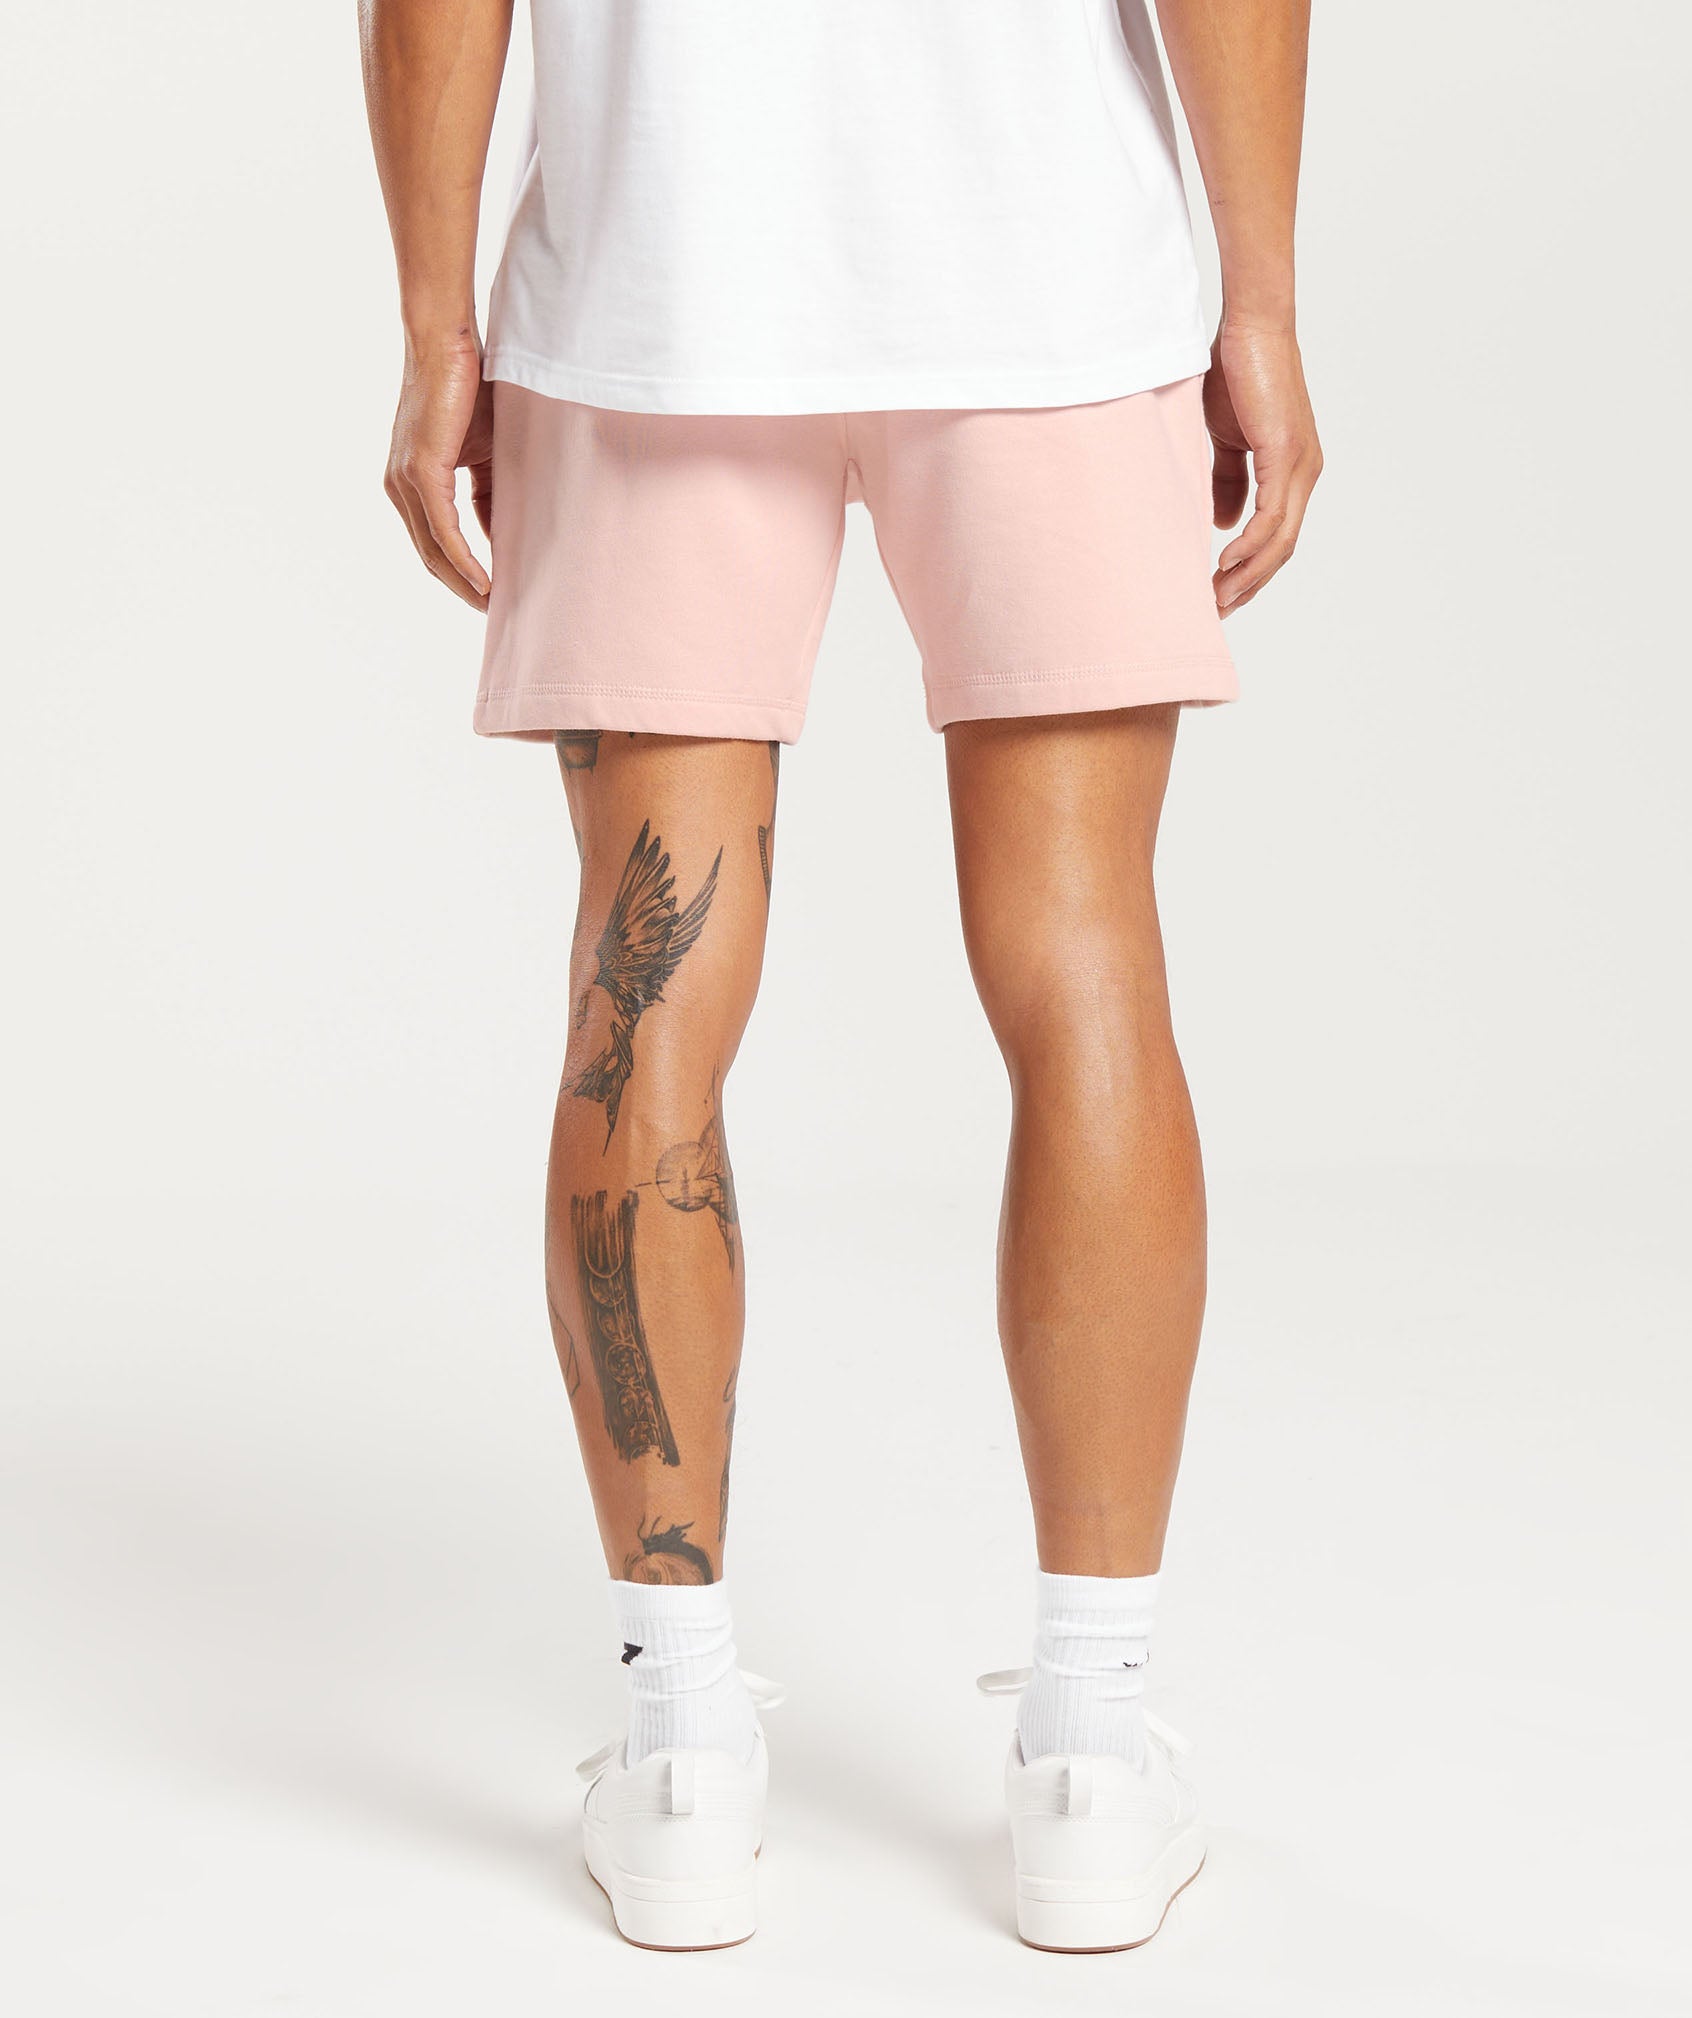 Crest Shorts in Misty Pink - view 2